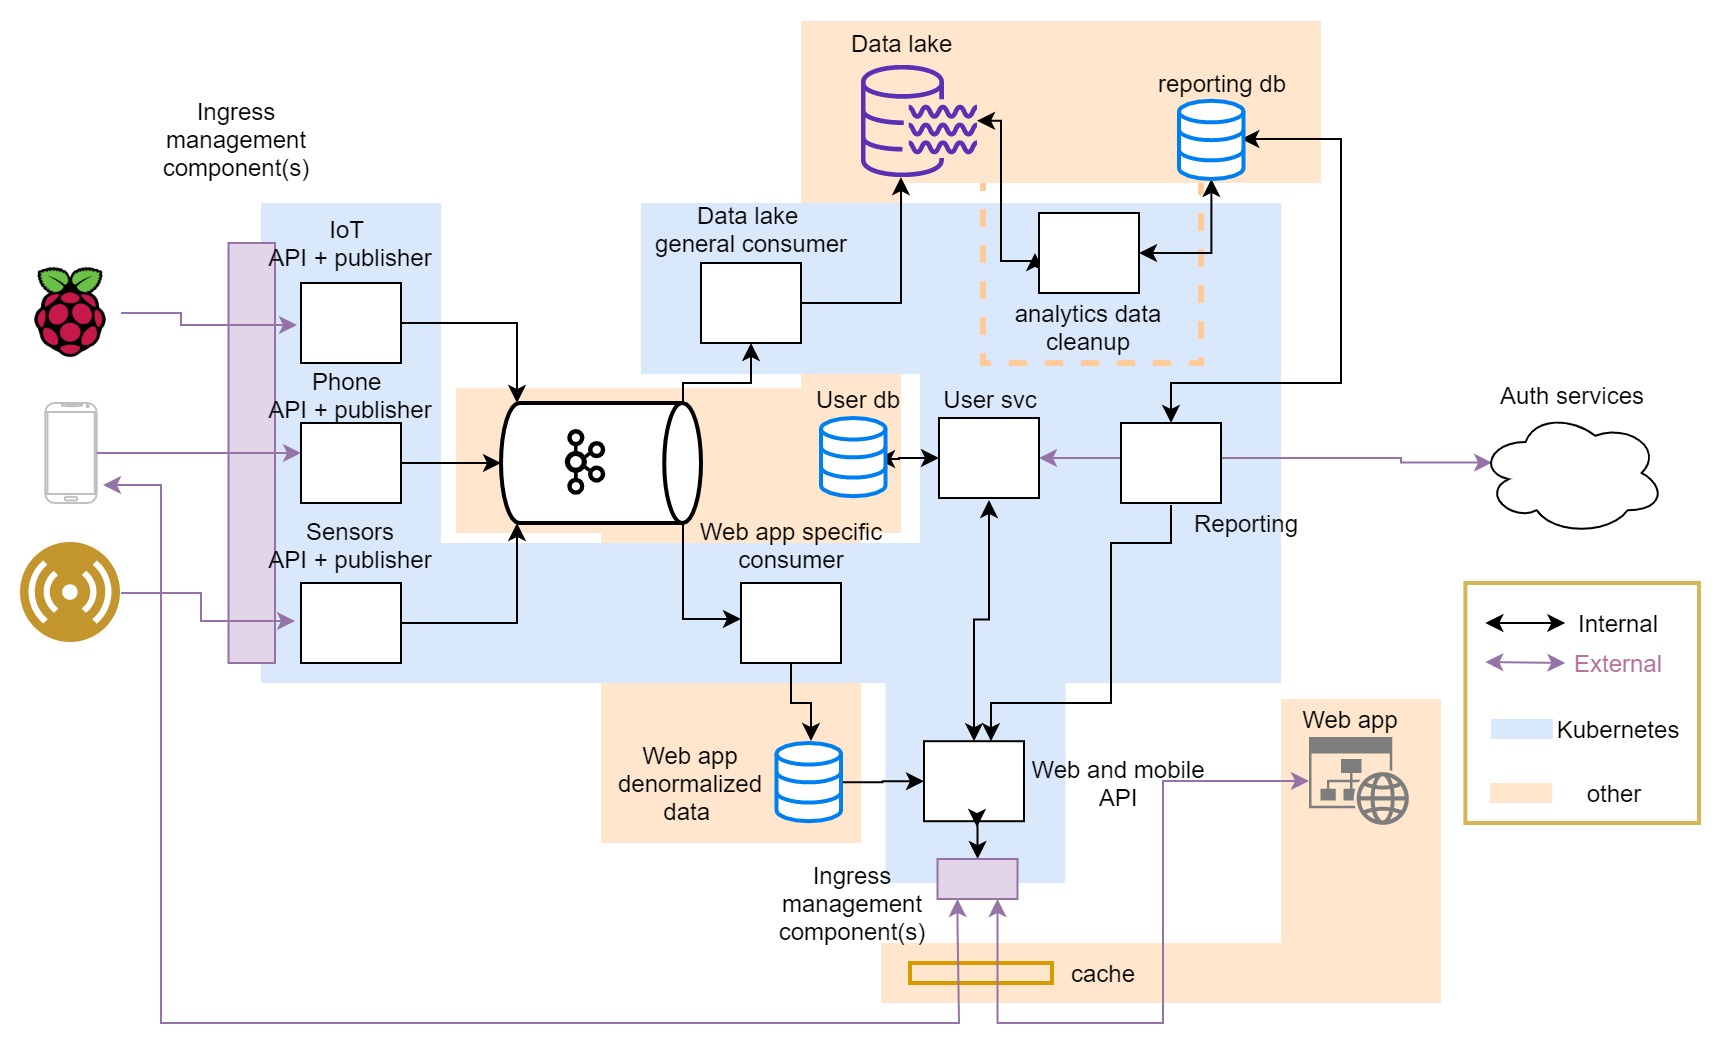 visual zoning and annotations applied to architecture diagram to show high level infrastructure setup